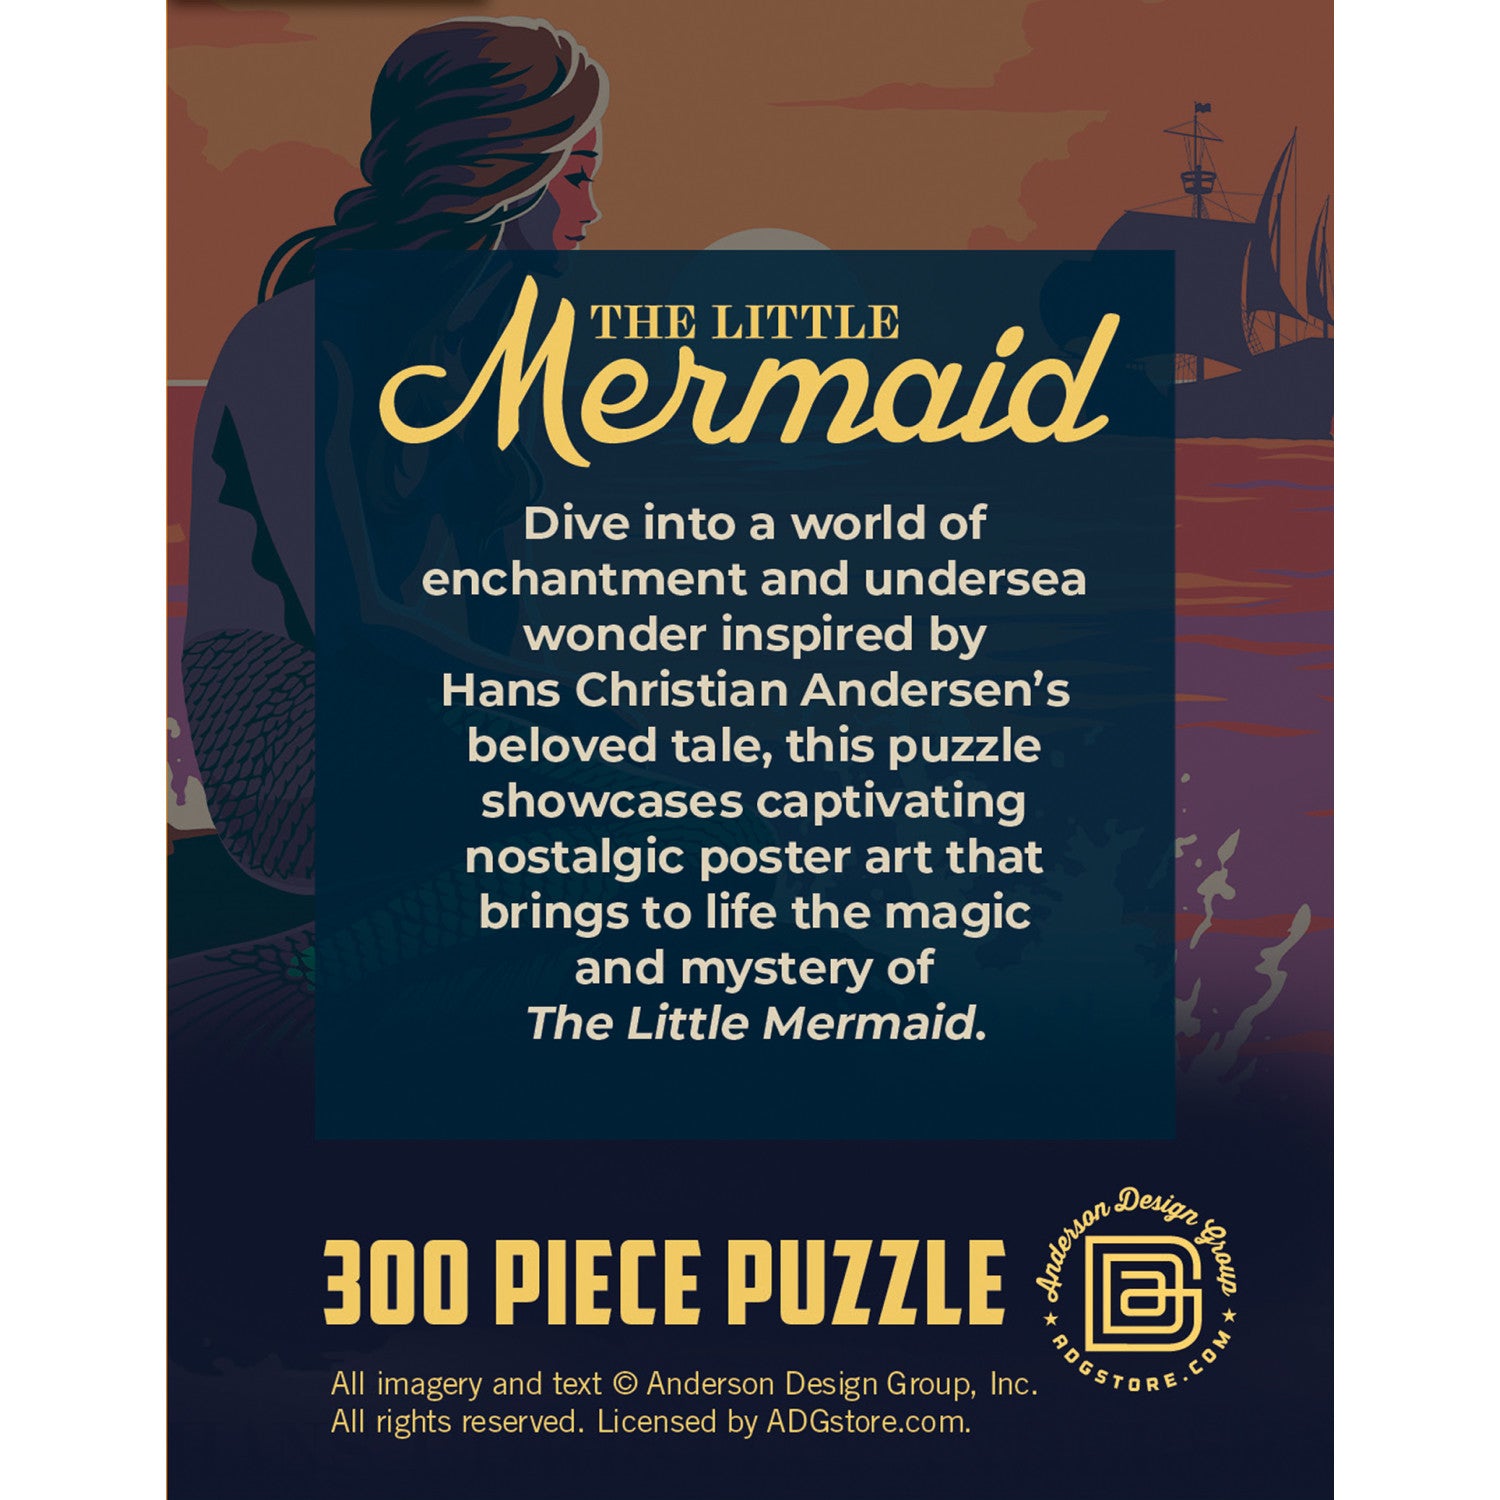 The Little Mermaid 300 Piece Jigsaw Puzzle